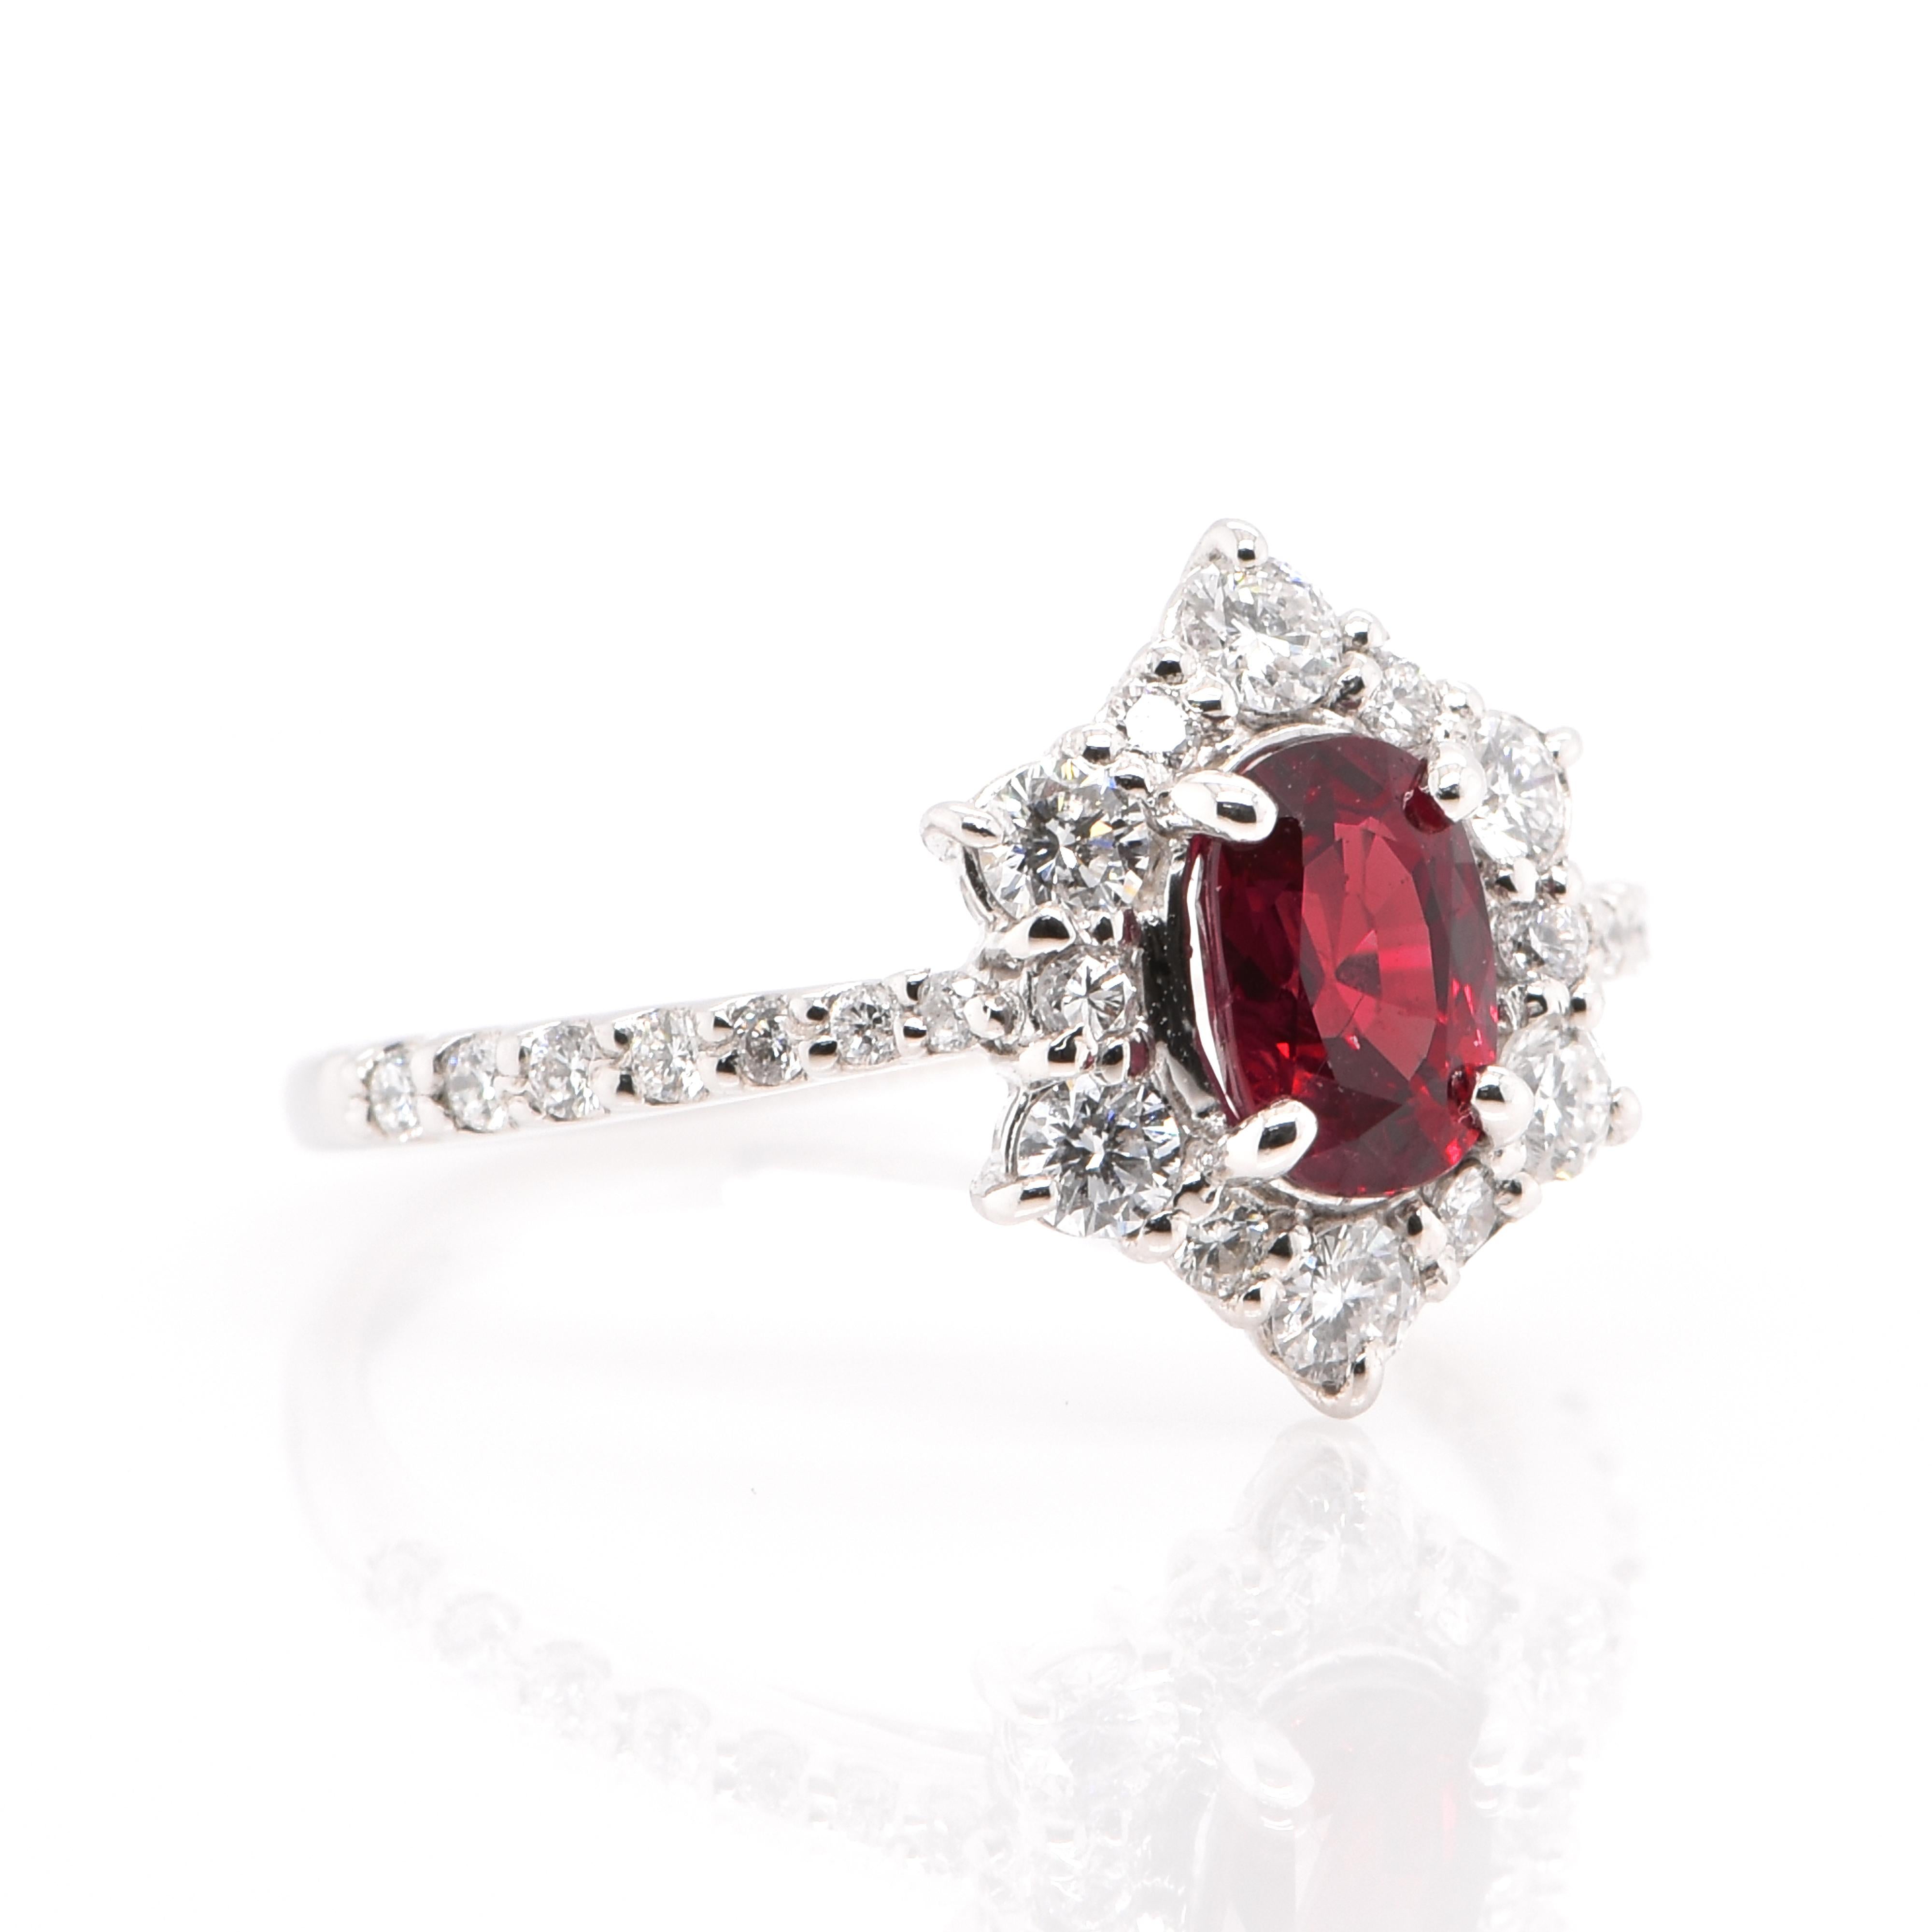 A beautiful Engagement Halo Ring featuring a 0.97 Carat, Natural Ruby and 0.48 Carats of Diamond Accents set in Platinum. The Ruby displays really exceptional luster and color. Rubies are referred to as 